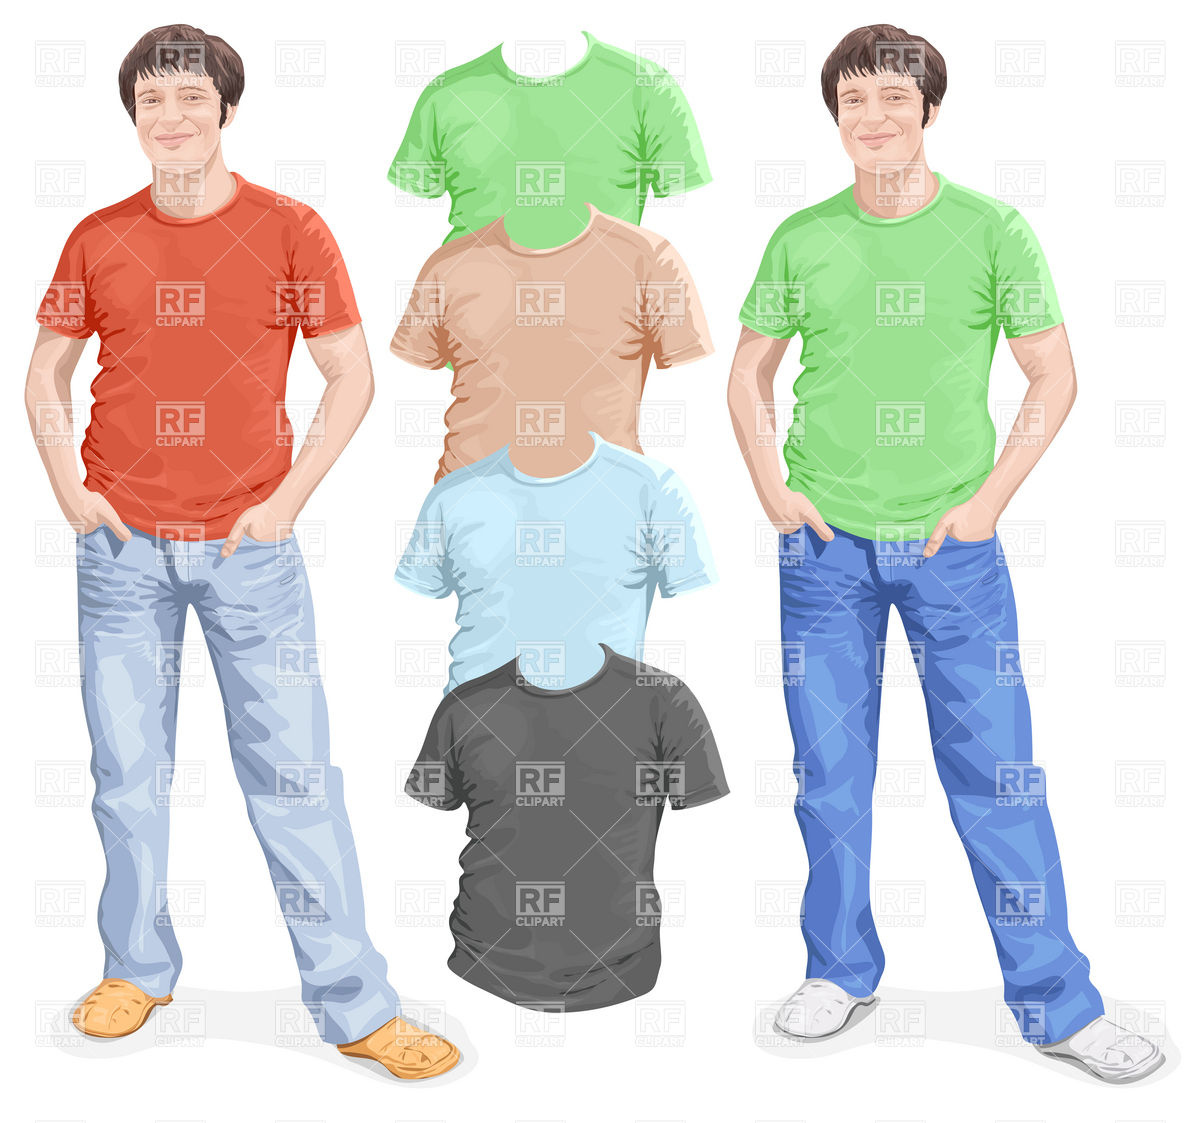 Man In T Shirt And Jeans 5296 Beauty Fashion Download Royalty Free